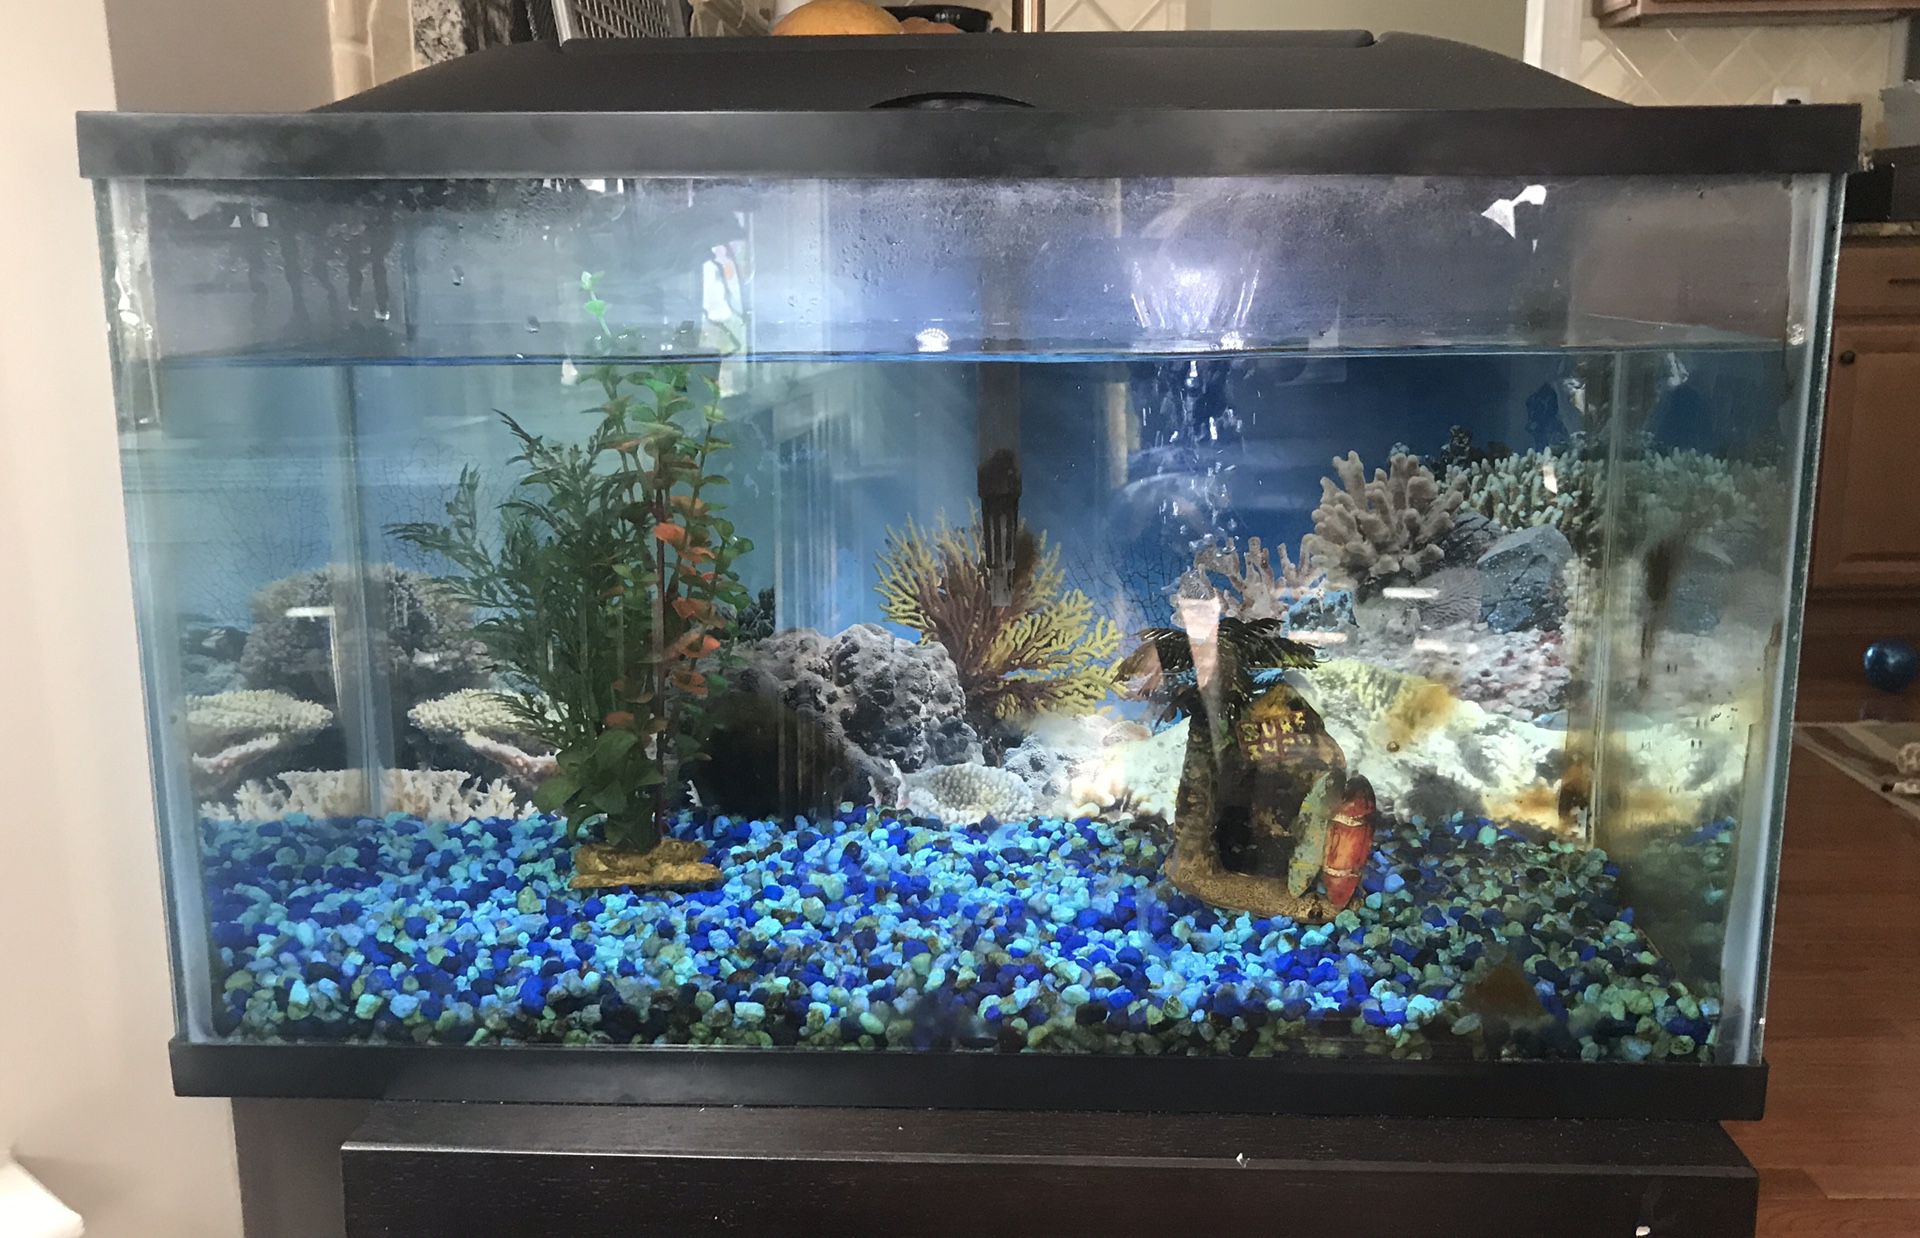 10 gallon fish tank. All you need to get started but the fish!